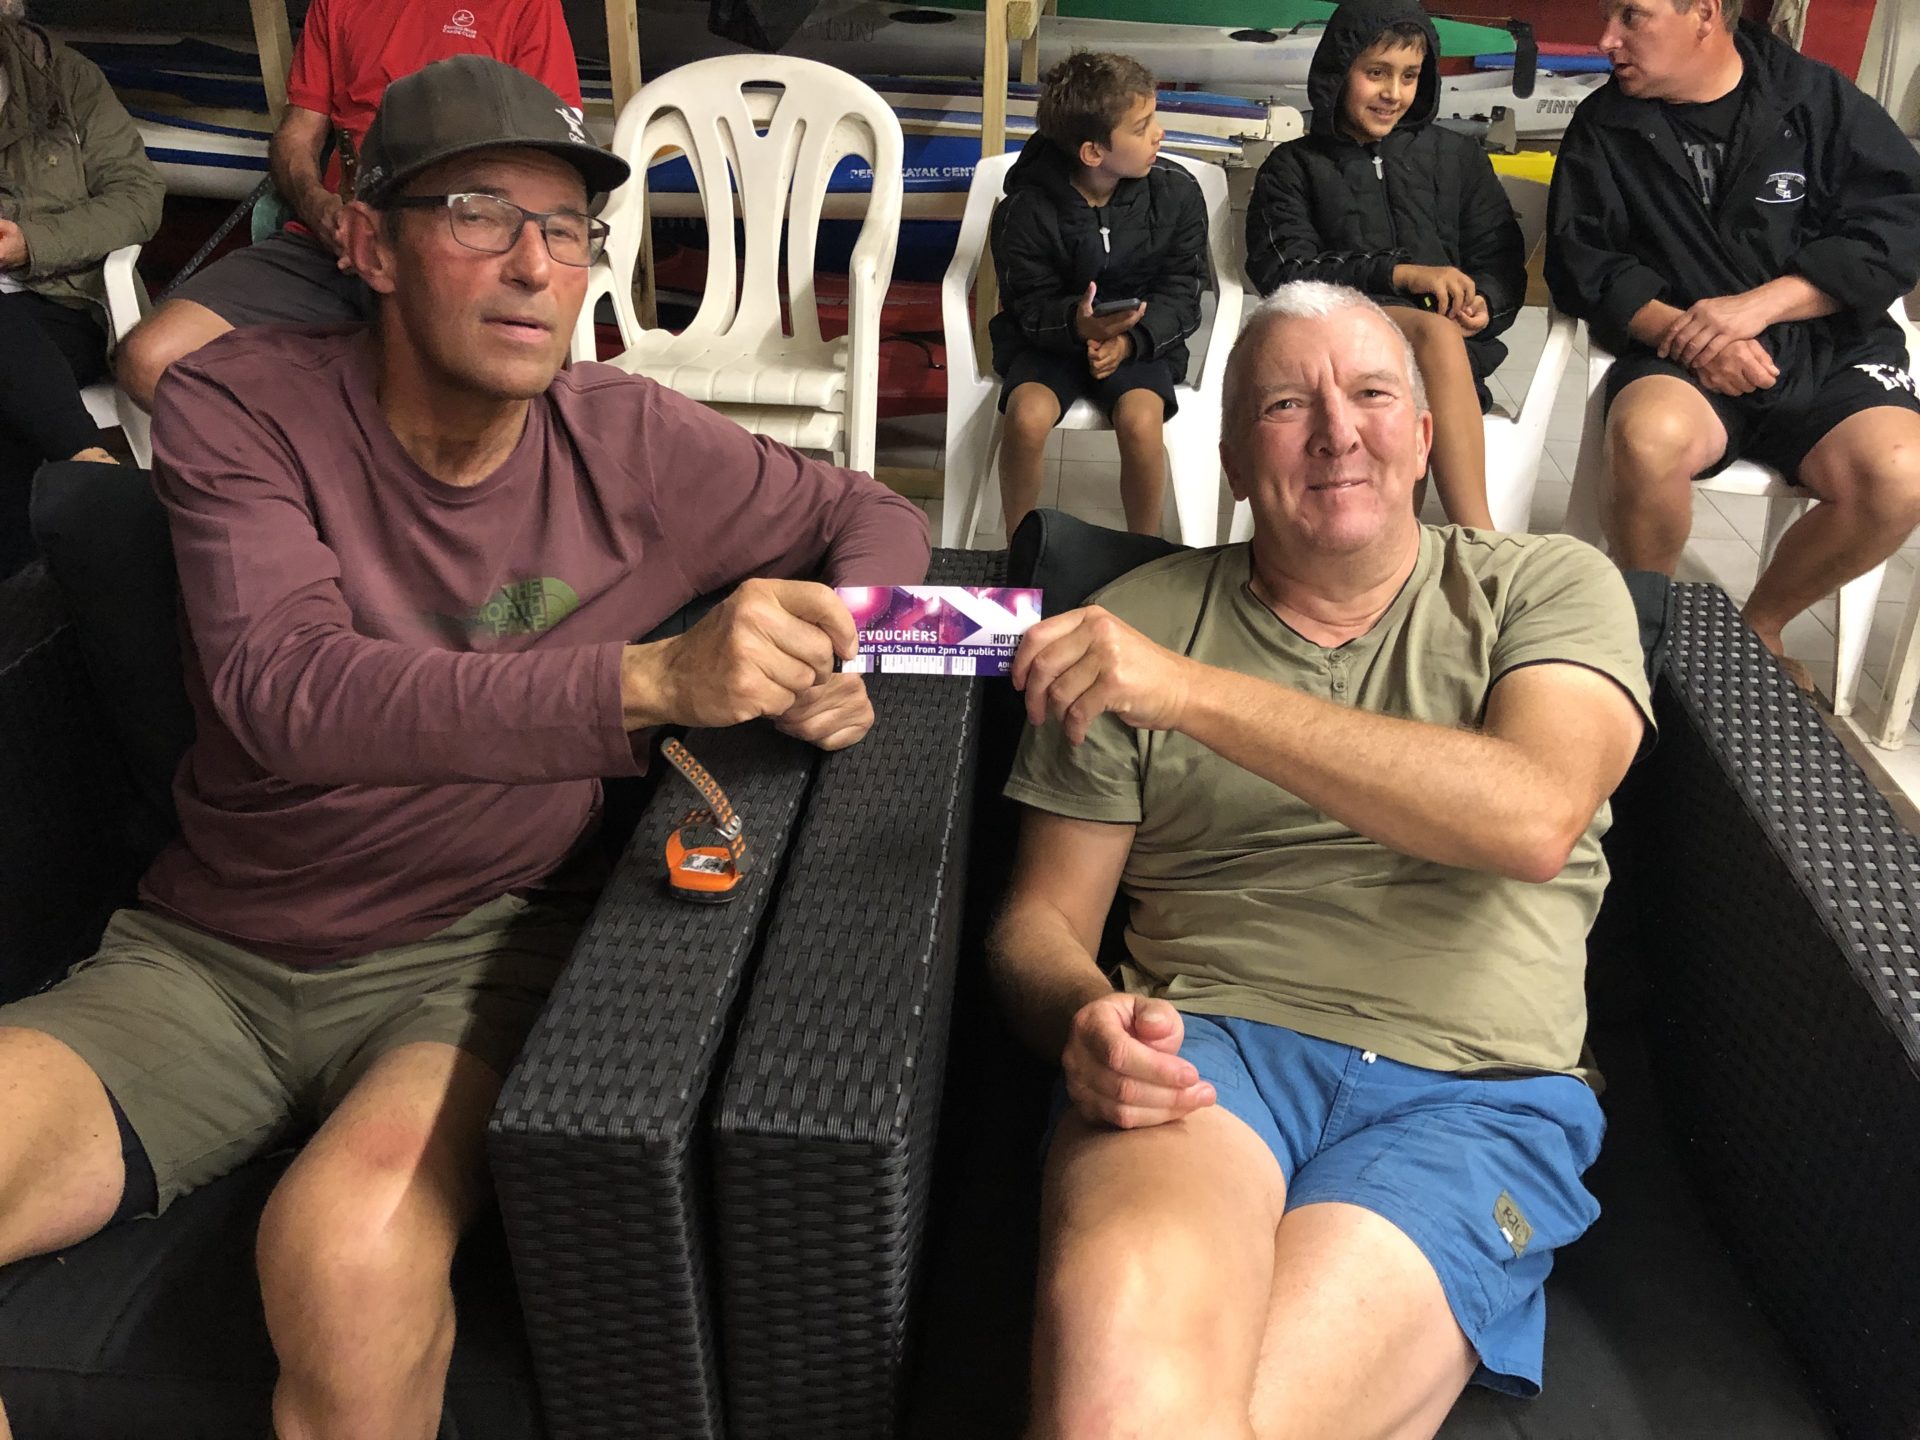 Tuesday 1st October 2019 : Tonight’s photo shows club member Doug Hodson presenting tonight’s winner Malcolm Goodall with a movie voucher.